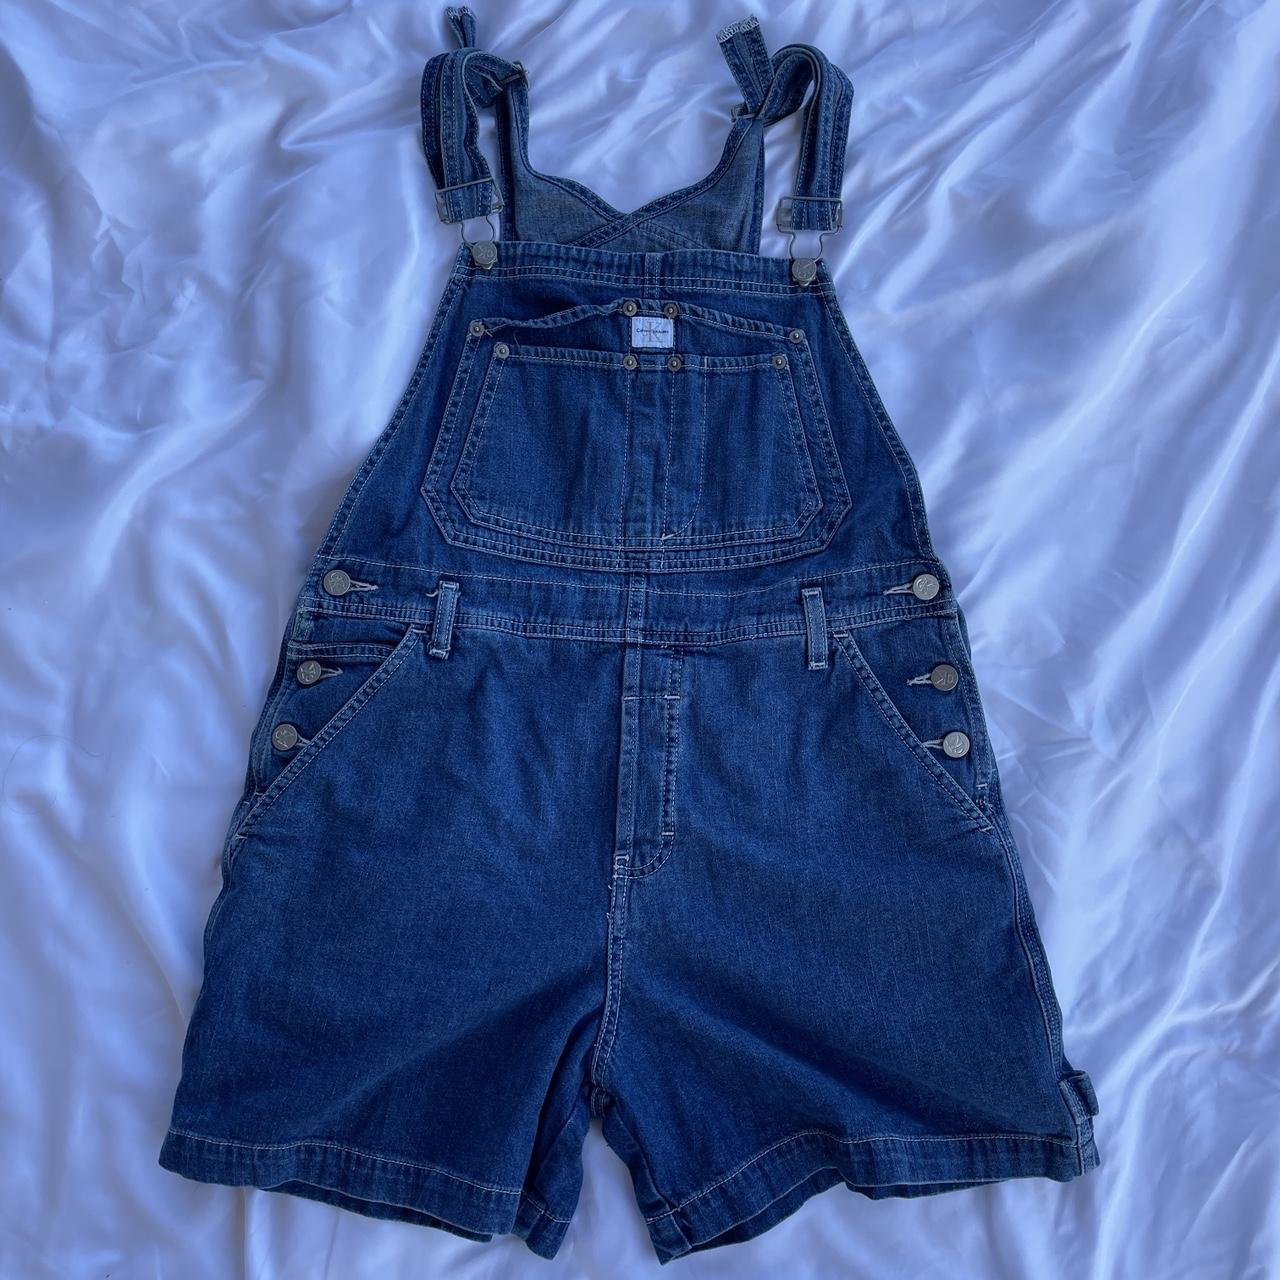 Calvin Klein Jeans Women's Navy and Blue Dungarees-overalls (3)